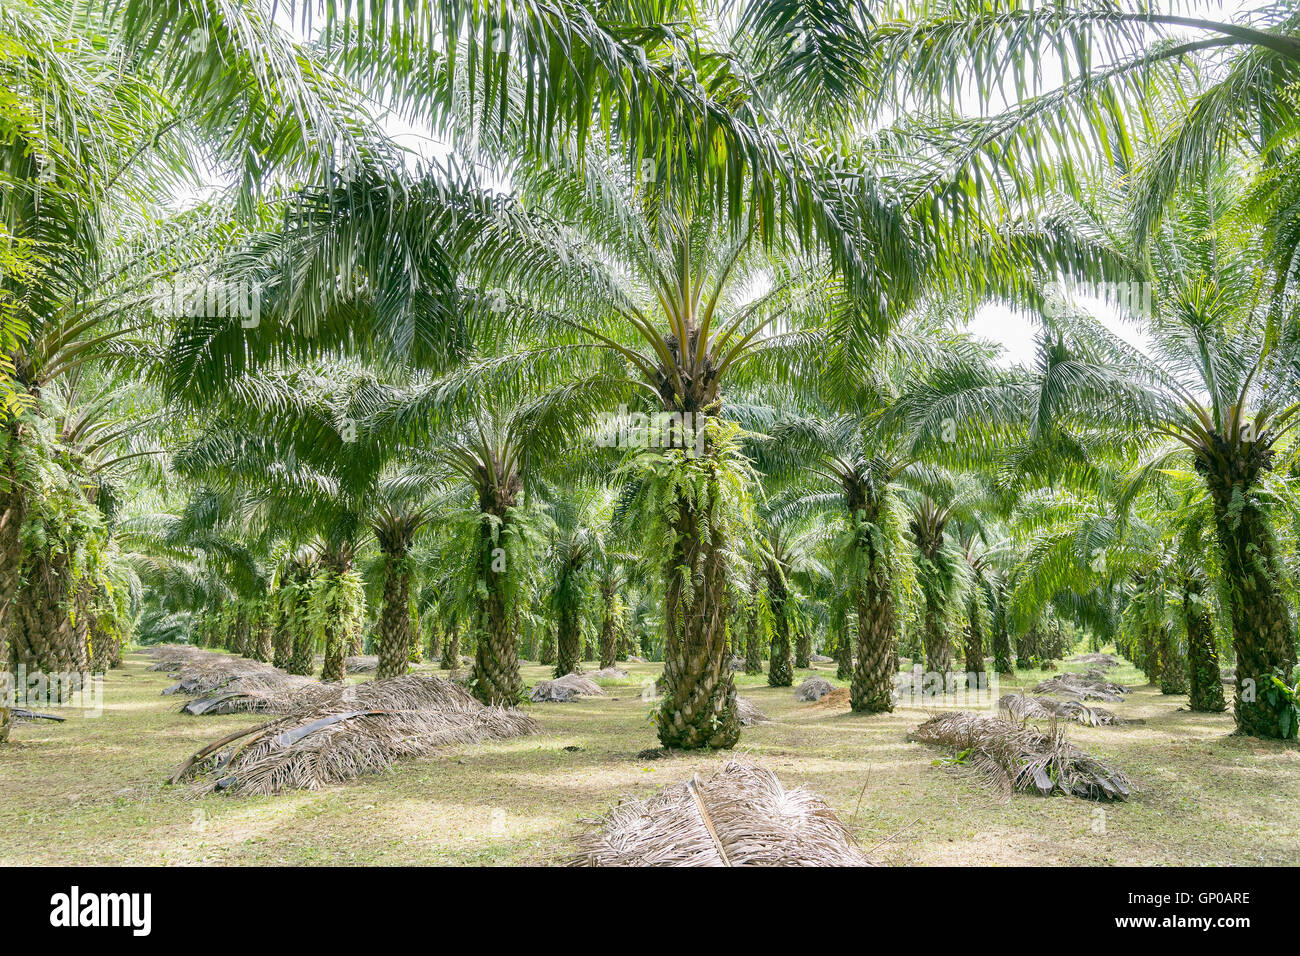 Matured Oil Palm Trees, Rows of Oil Palm Plantation. Stock Photo